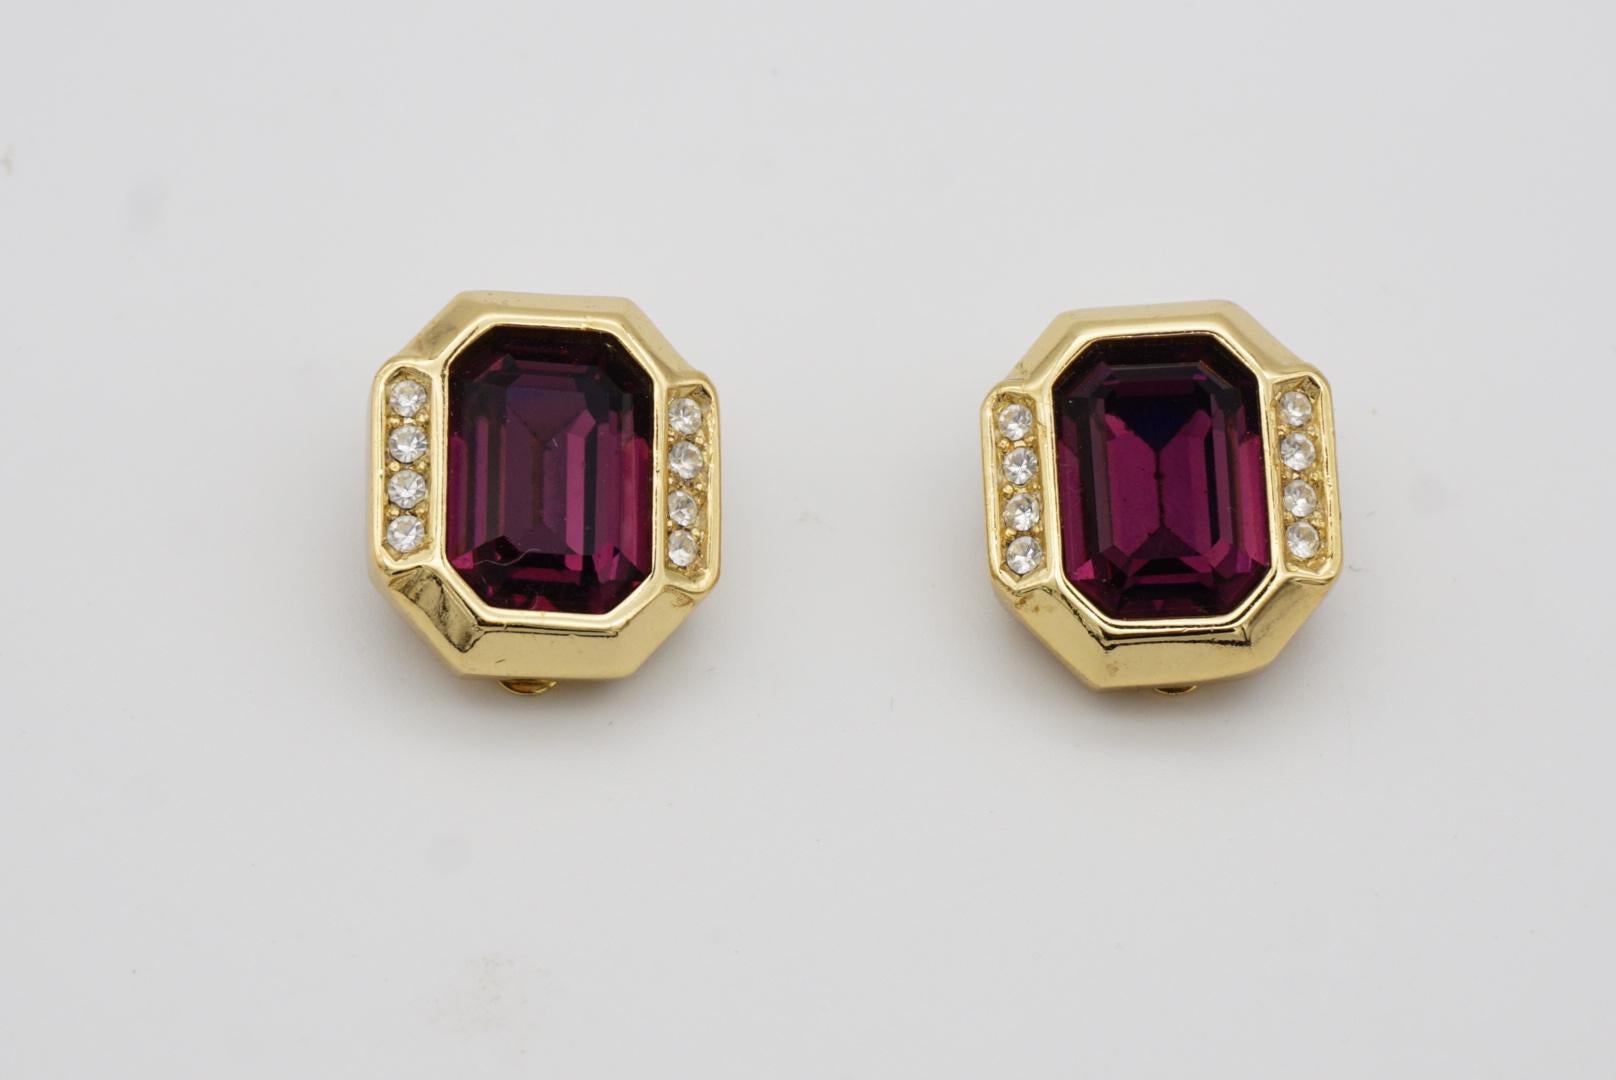 Christian Dior Vintage 1980s Amethyst Purple Crystals Octagonal Clip Earrings For Sale 4